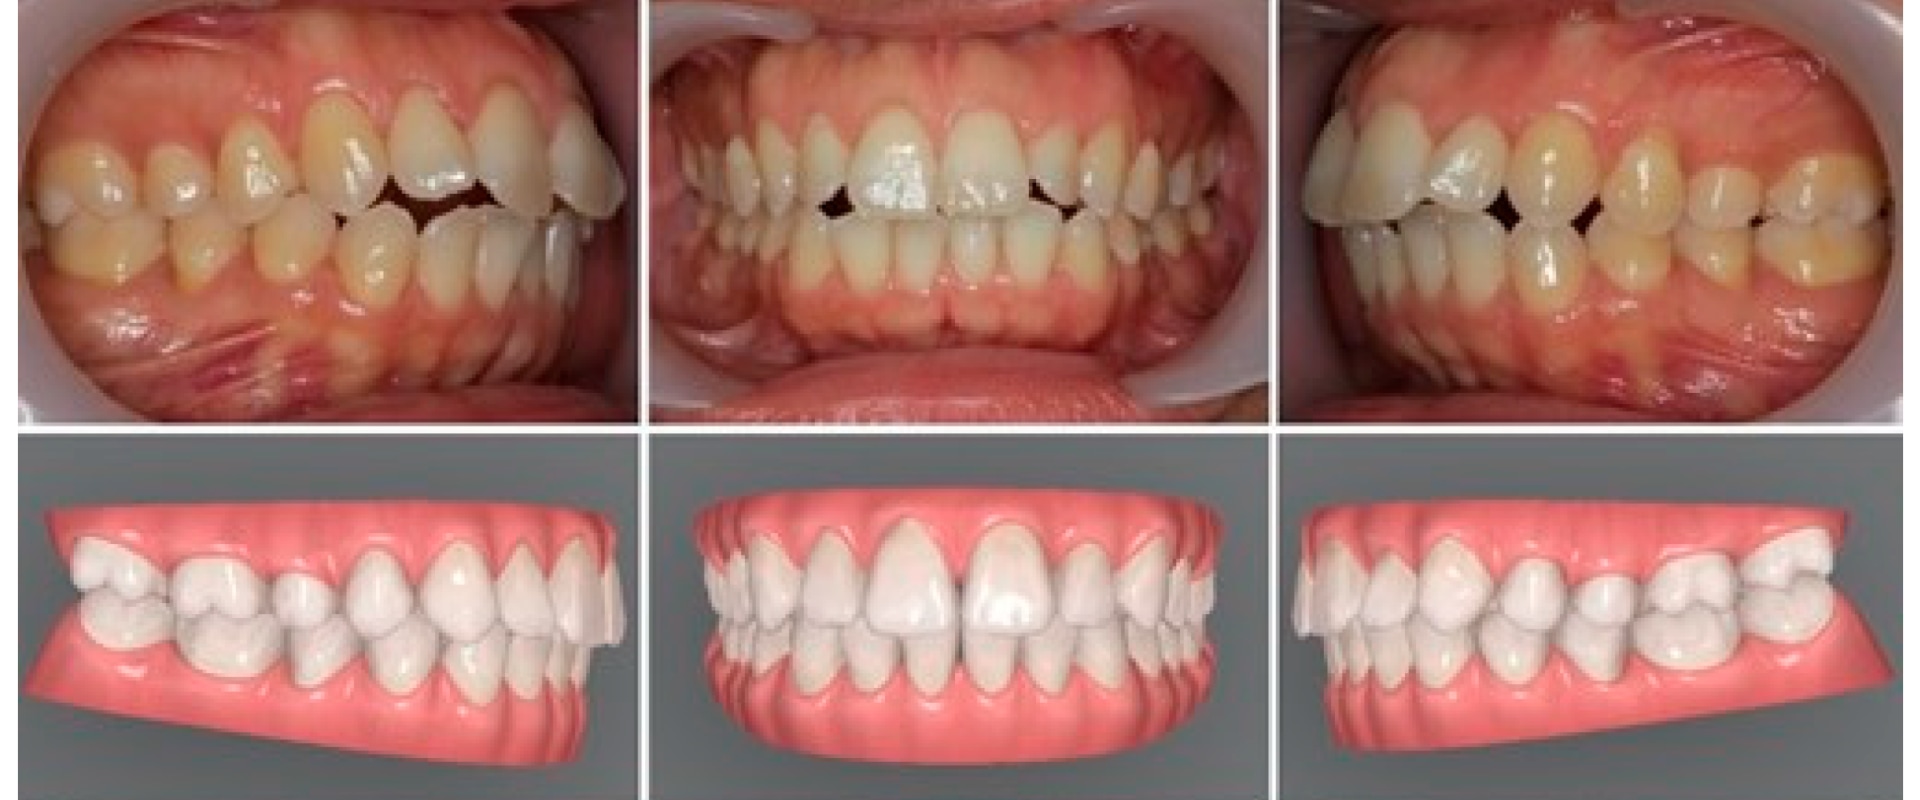 Research on the Effectiveness of Invisalign